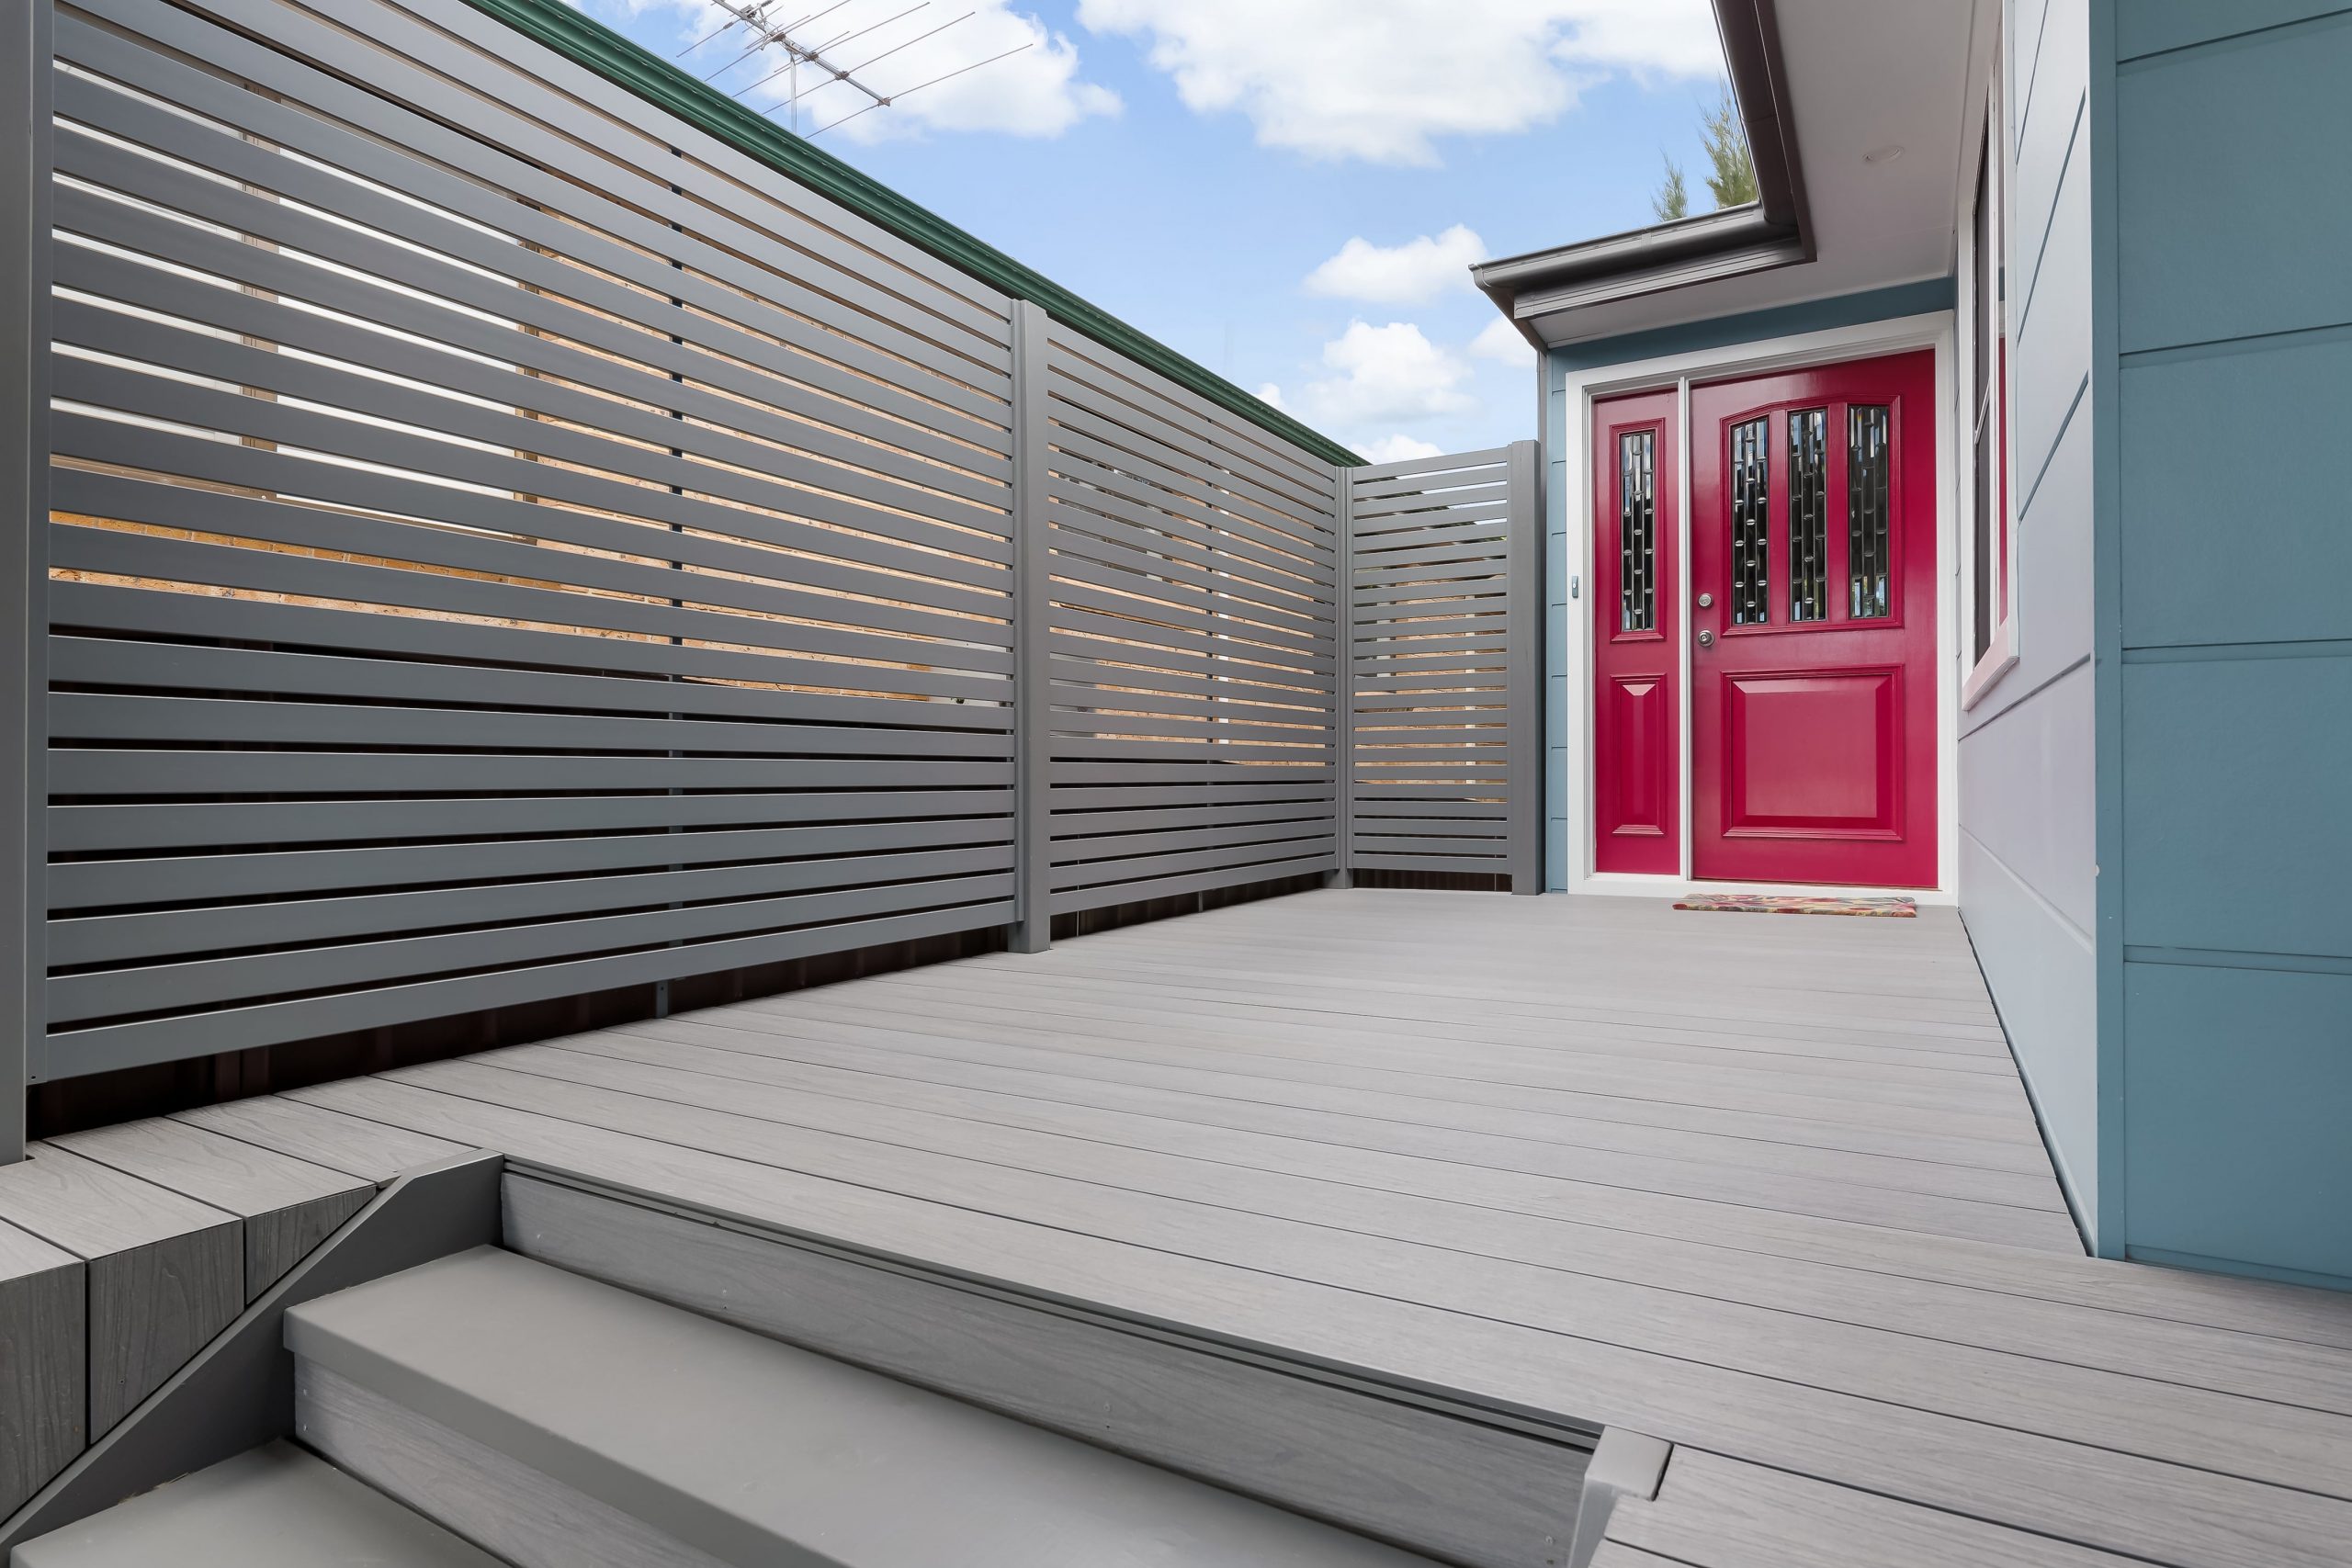 Mountain Ash composite decking boards leading up to a red door